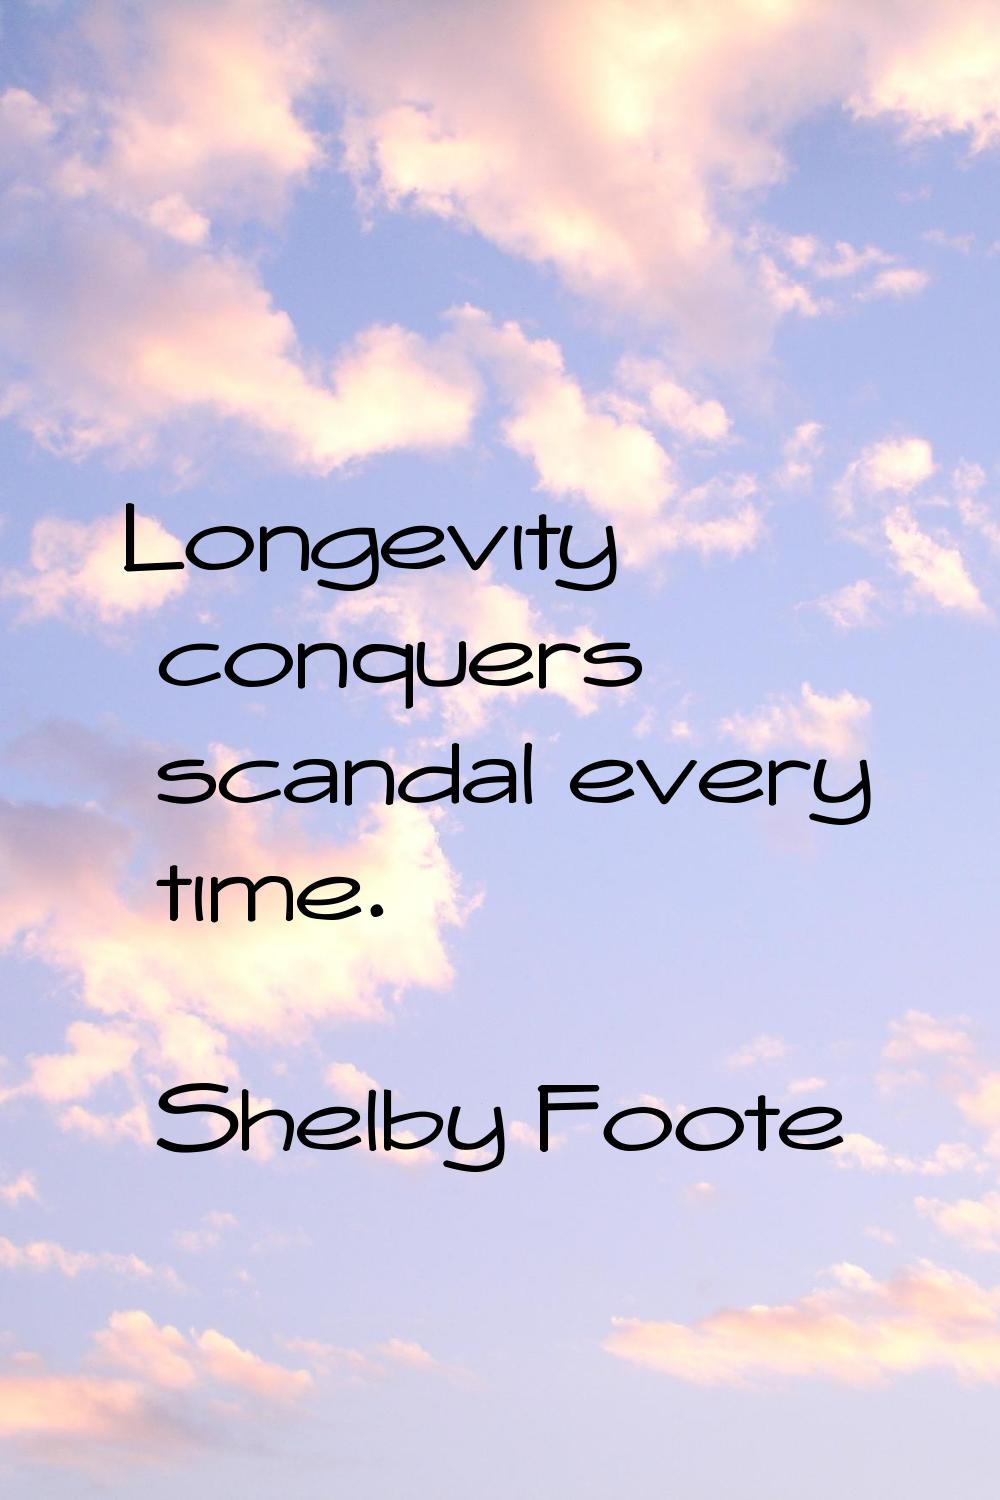 Longevity conquers scandal every time.